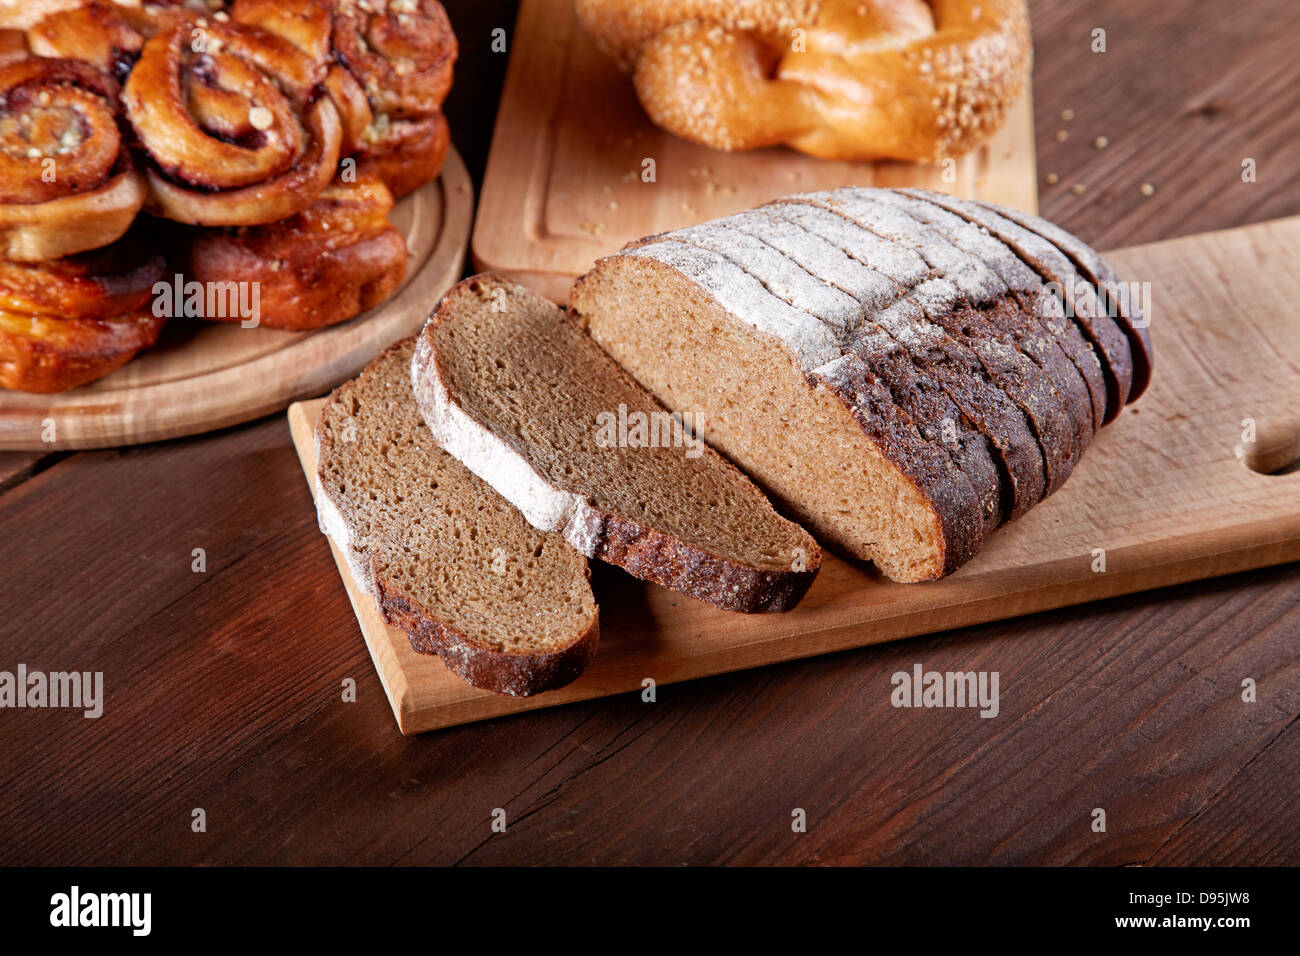 Still-life with the cut bread and rolls Stock Photo